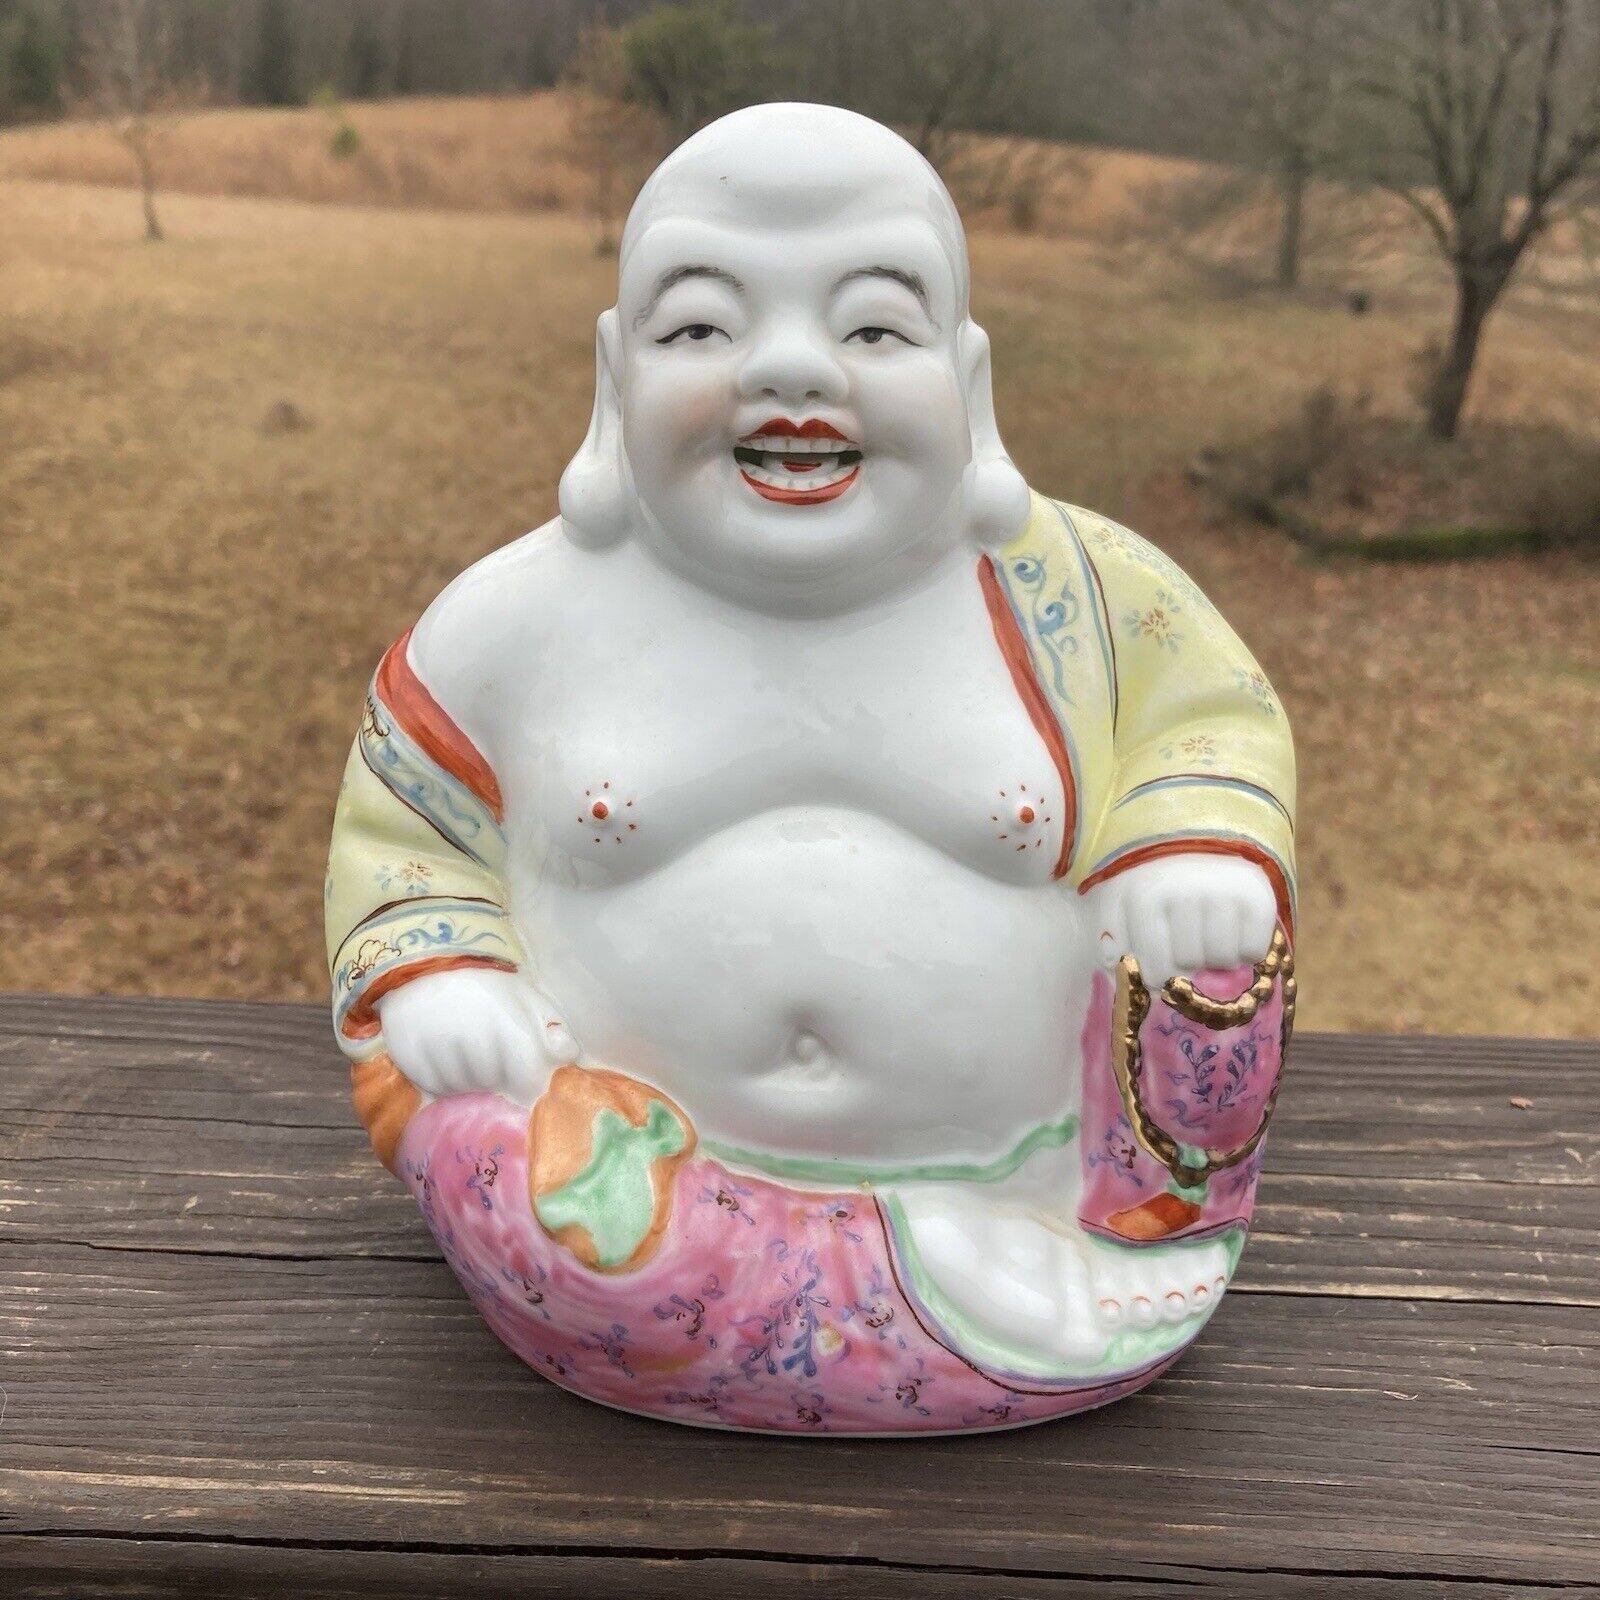 Vintage Chinese Hand Painted Porcelain Laughing Buddha Figurine 6-1/2” Tall